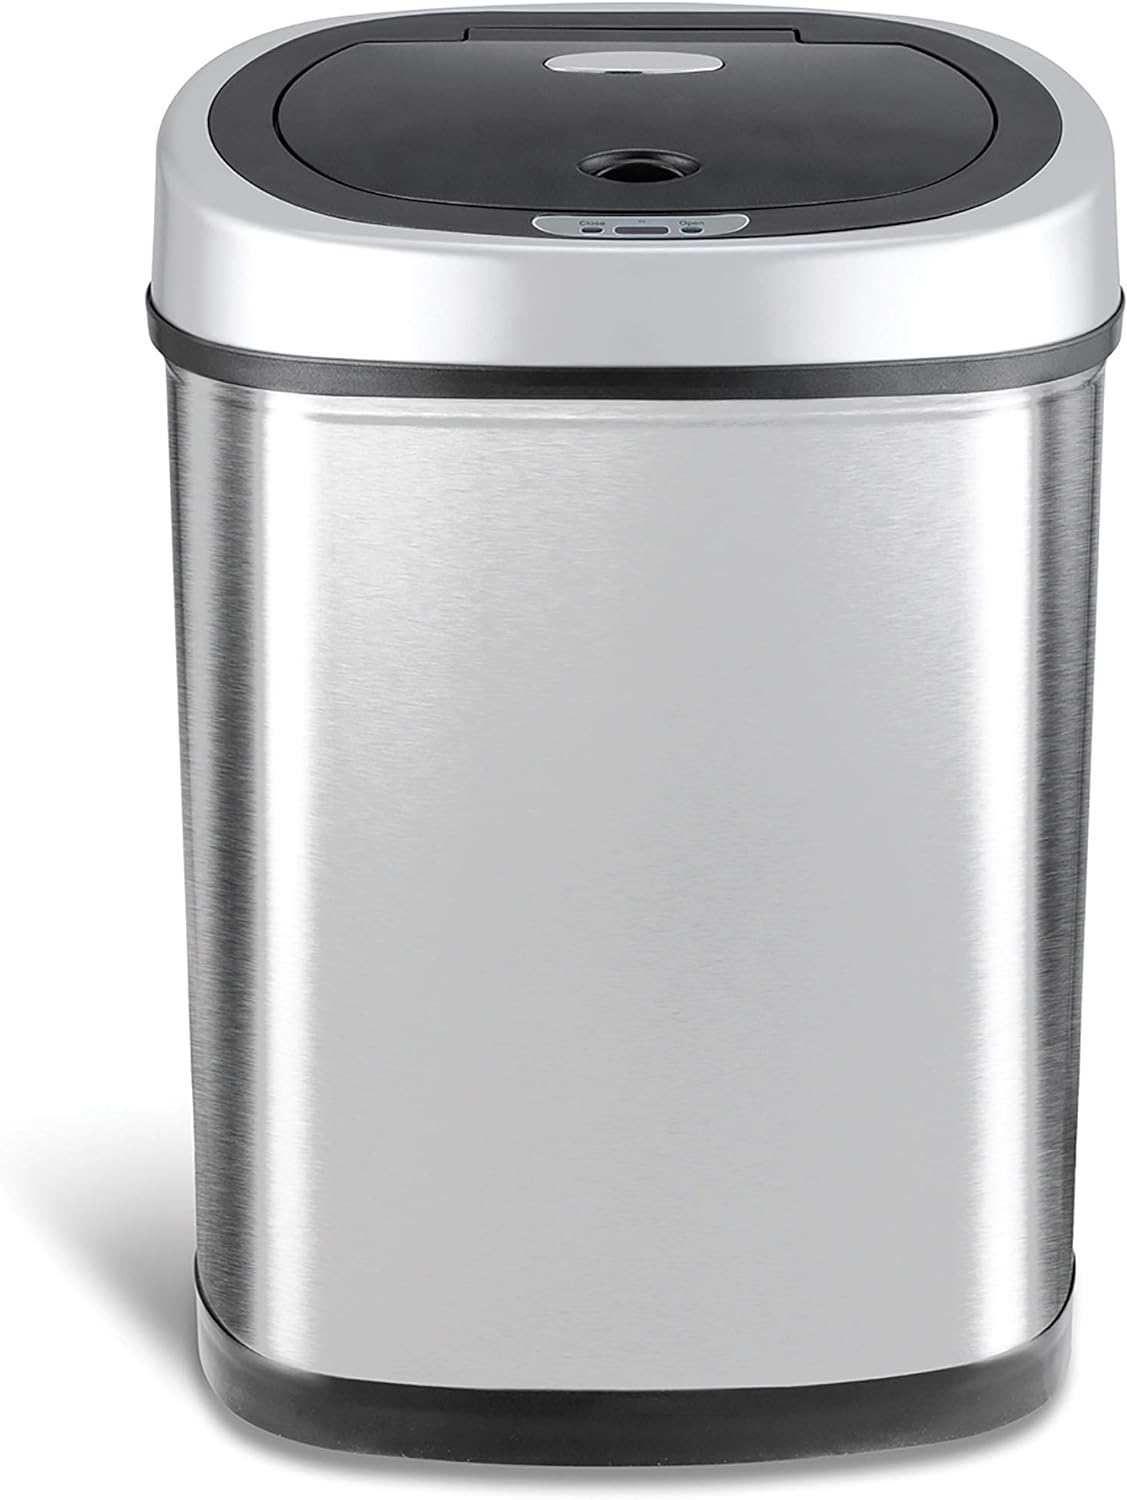 https://bigbigmart.com/wp-content/uploads/2023/10/NINESTARS-DZT-42-9-Automatic-Touchless-Infrared-Motion-Sensor-Trash-Can-11-Gal-42L-Stainless-Steel-Base-Oval-Silver-Black-Lid5.jpg